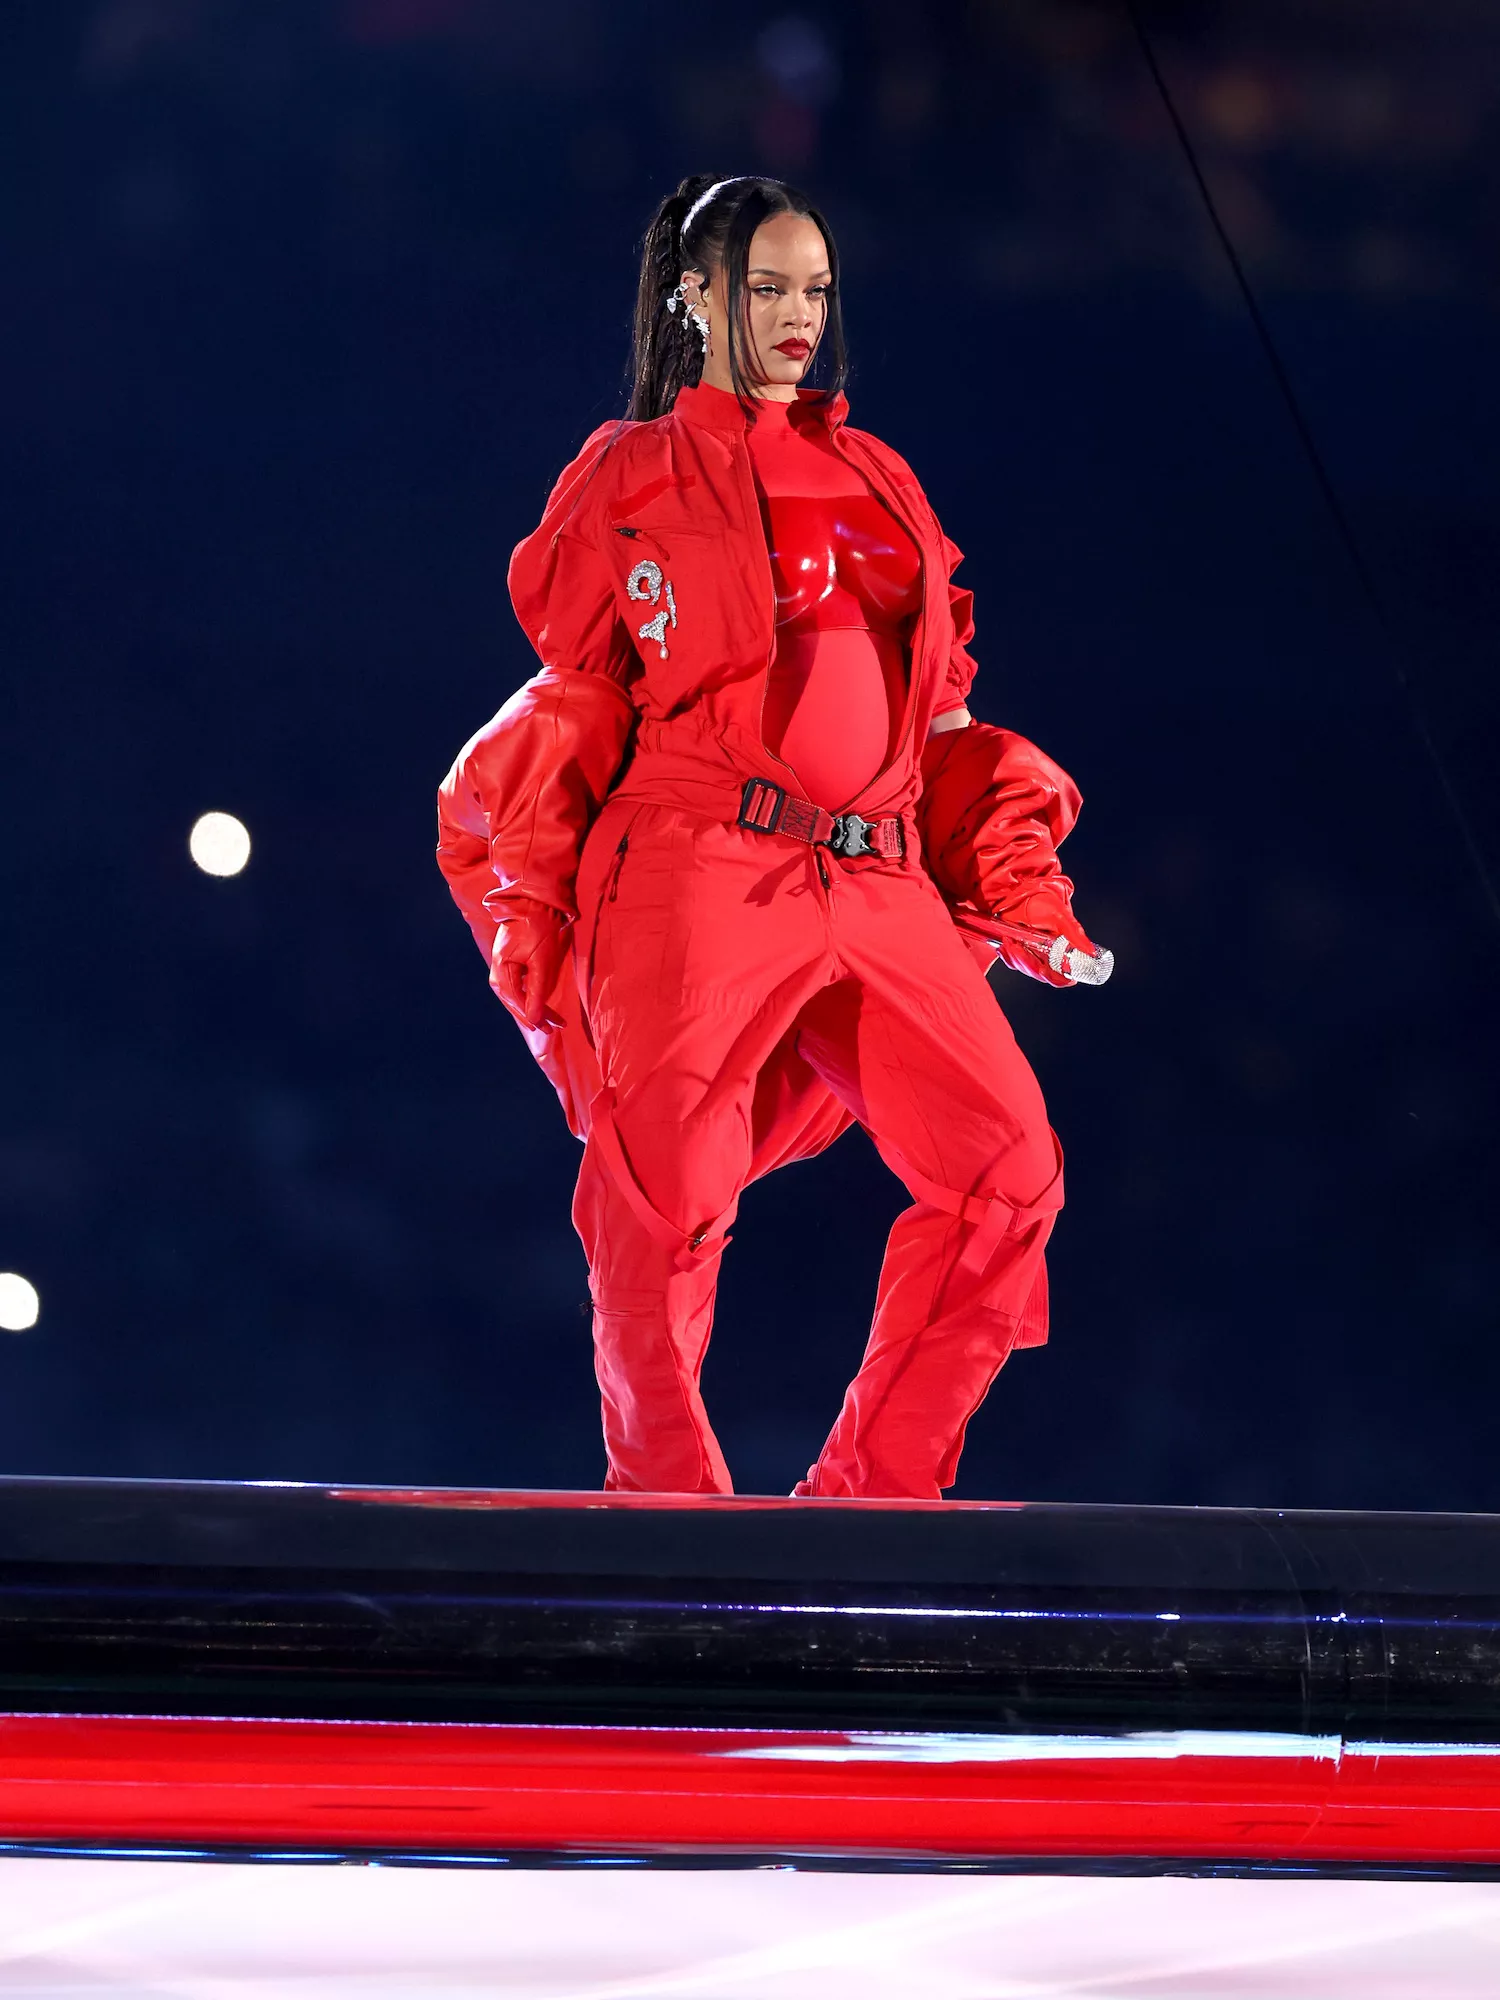 Rihanna wears a red jumpsuit and bodysuit on stage at the Super Bowl LVII halftime show